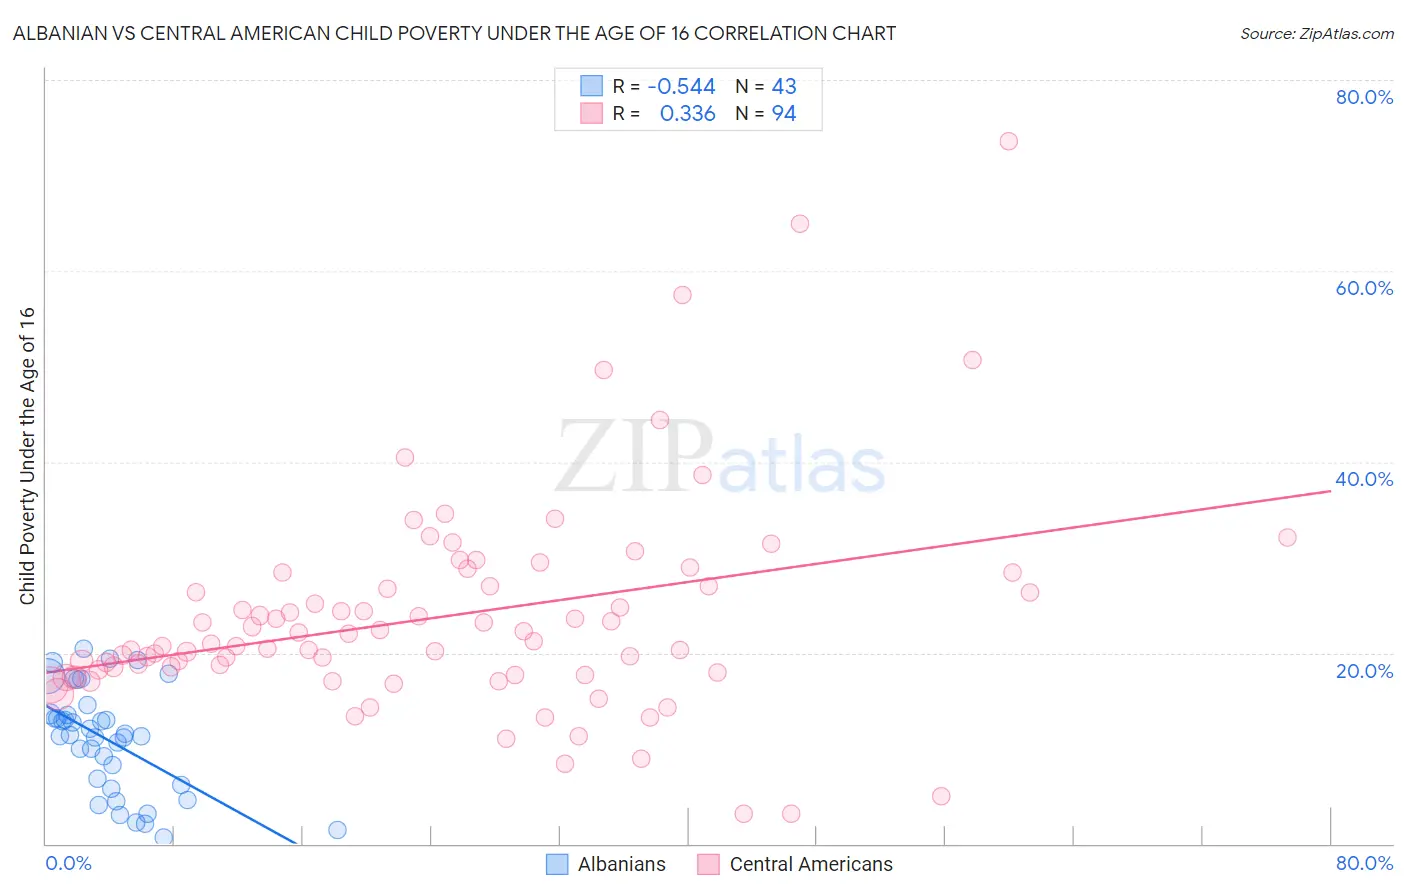 Albanian vs Central American Child Poverty Under the Age of 16